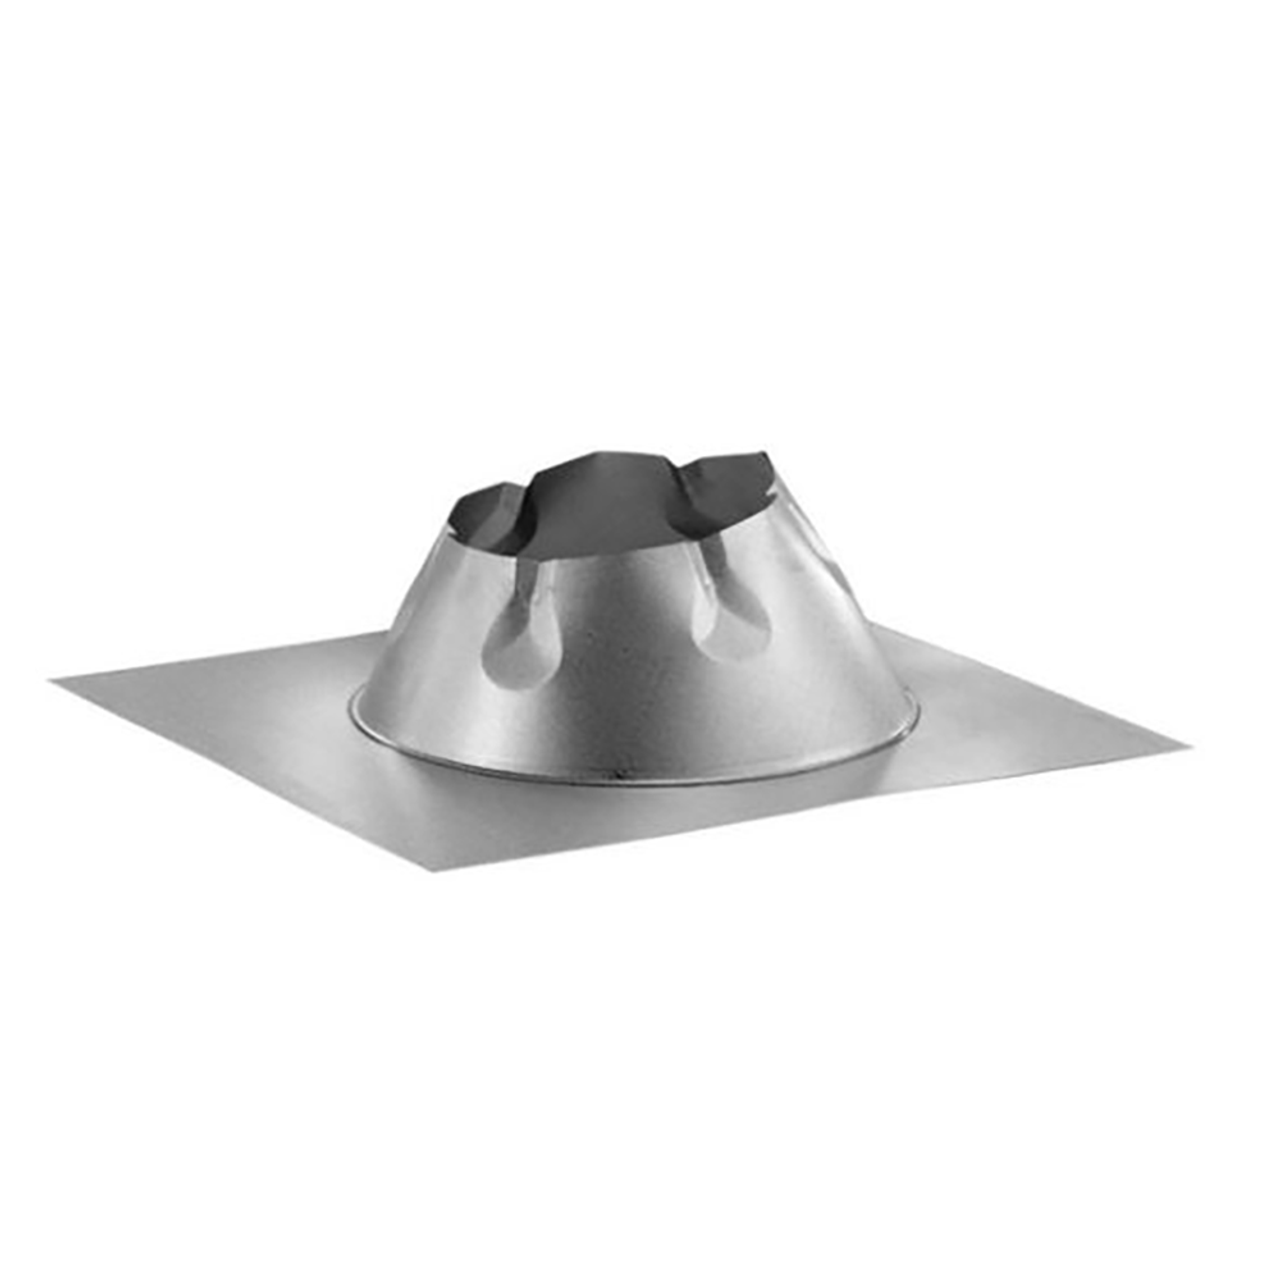 DuraVent DuraPlus Galvalume 0/12 - 6/12 Roof Flashing - Storm Collar Not Included